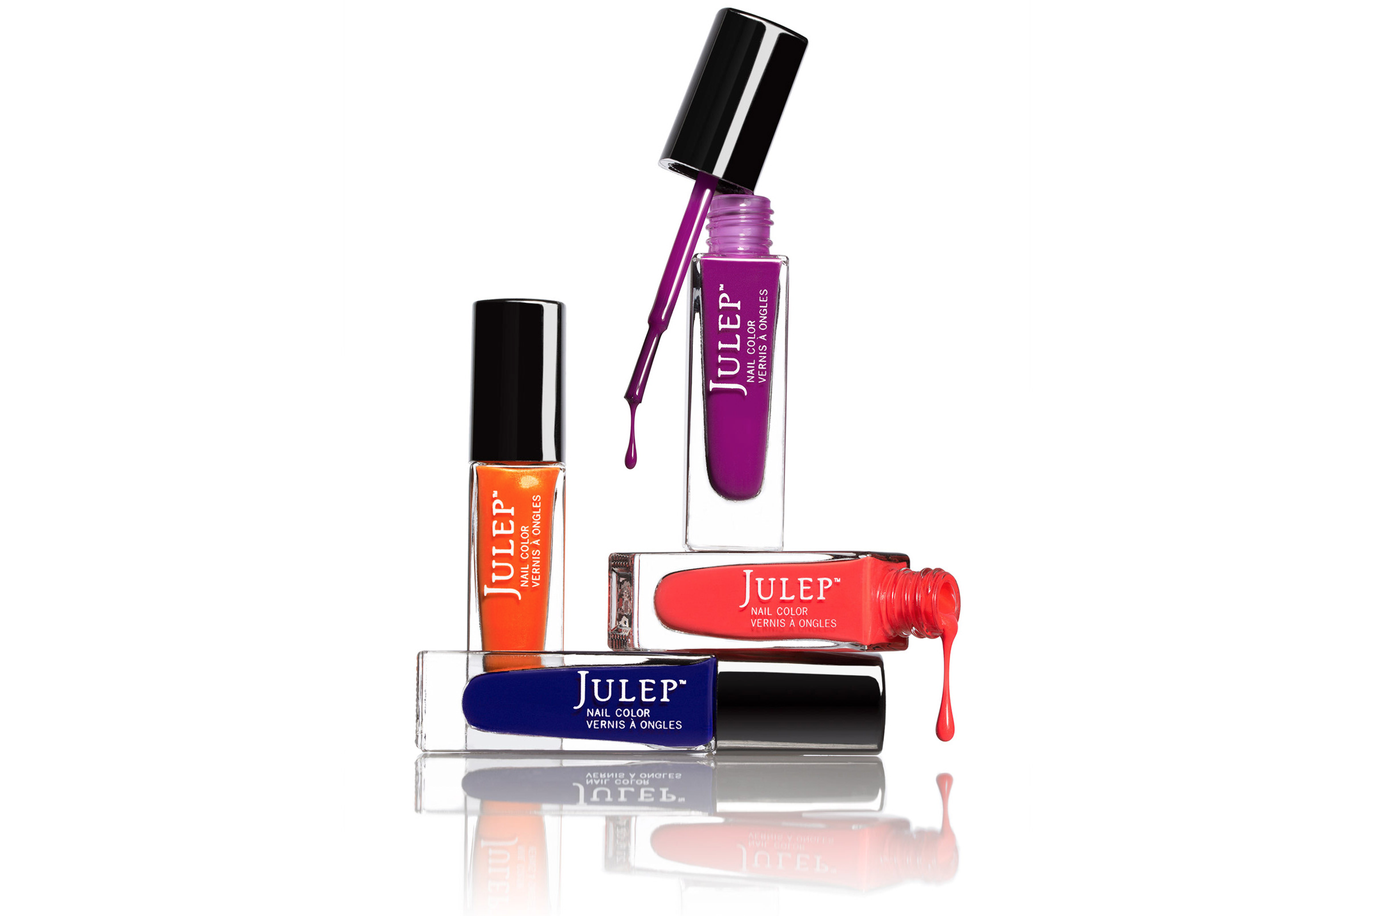 How Julep Went from the “Fastest Growing Omnichannel Beauty Brand” to Bankruptcy